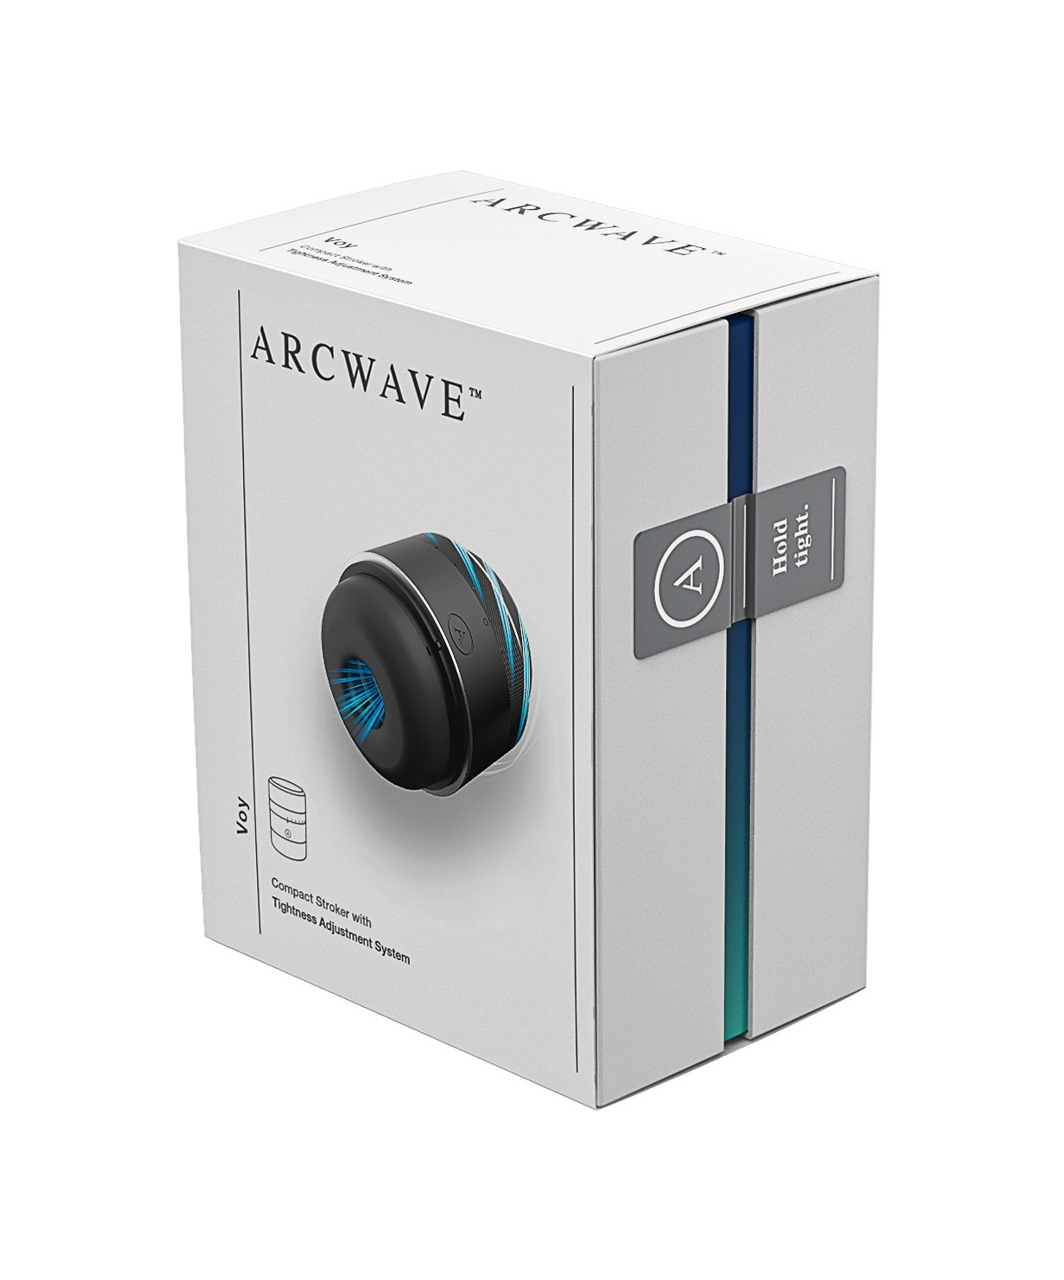 Arcwave Voy Compact Stroker with Tightness Ajustment System